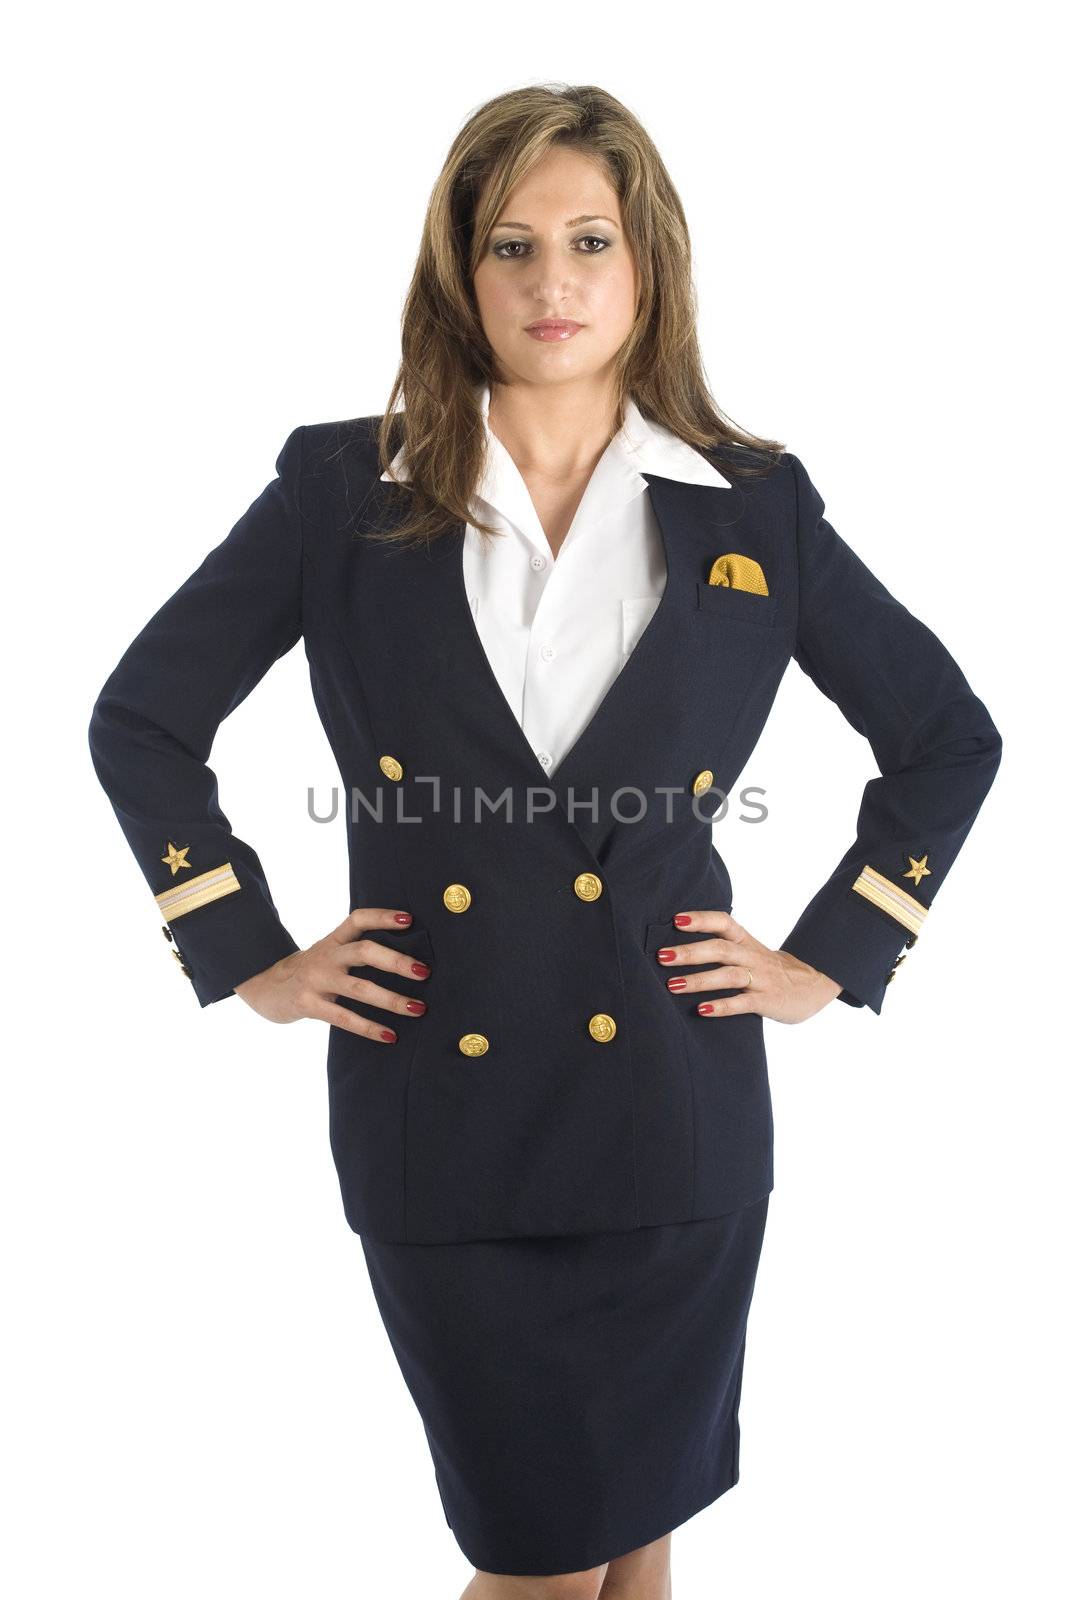 A young brazilian model in a studio shot, wearing a seaman's (or seawoman's) uniform, isolated on white.